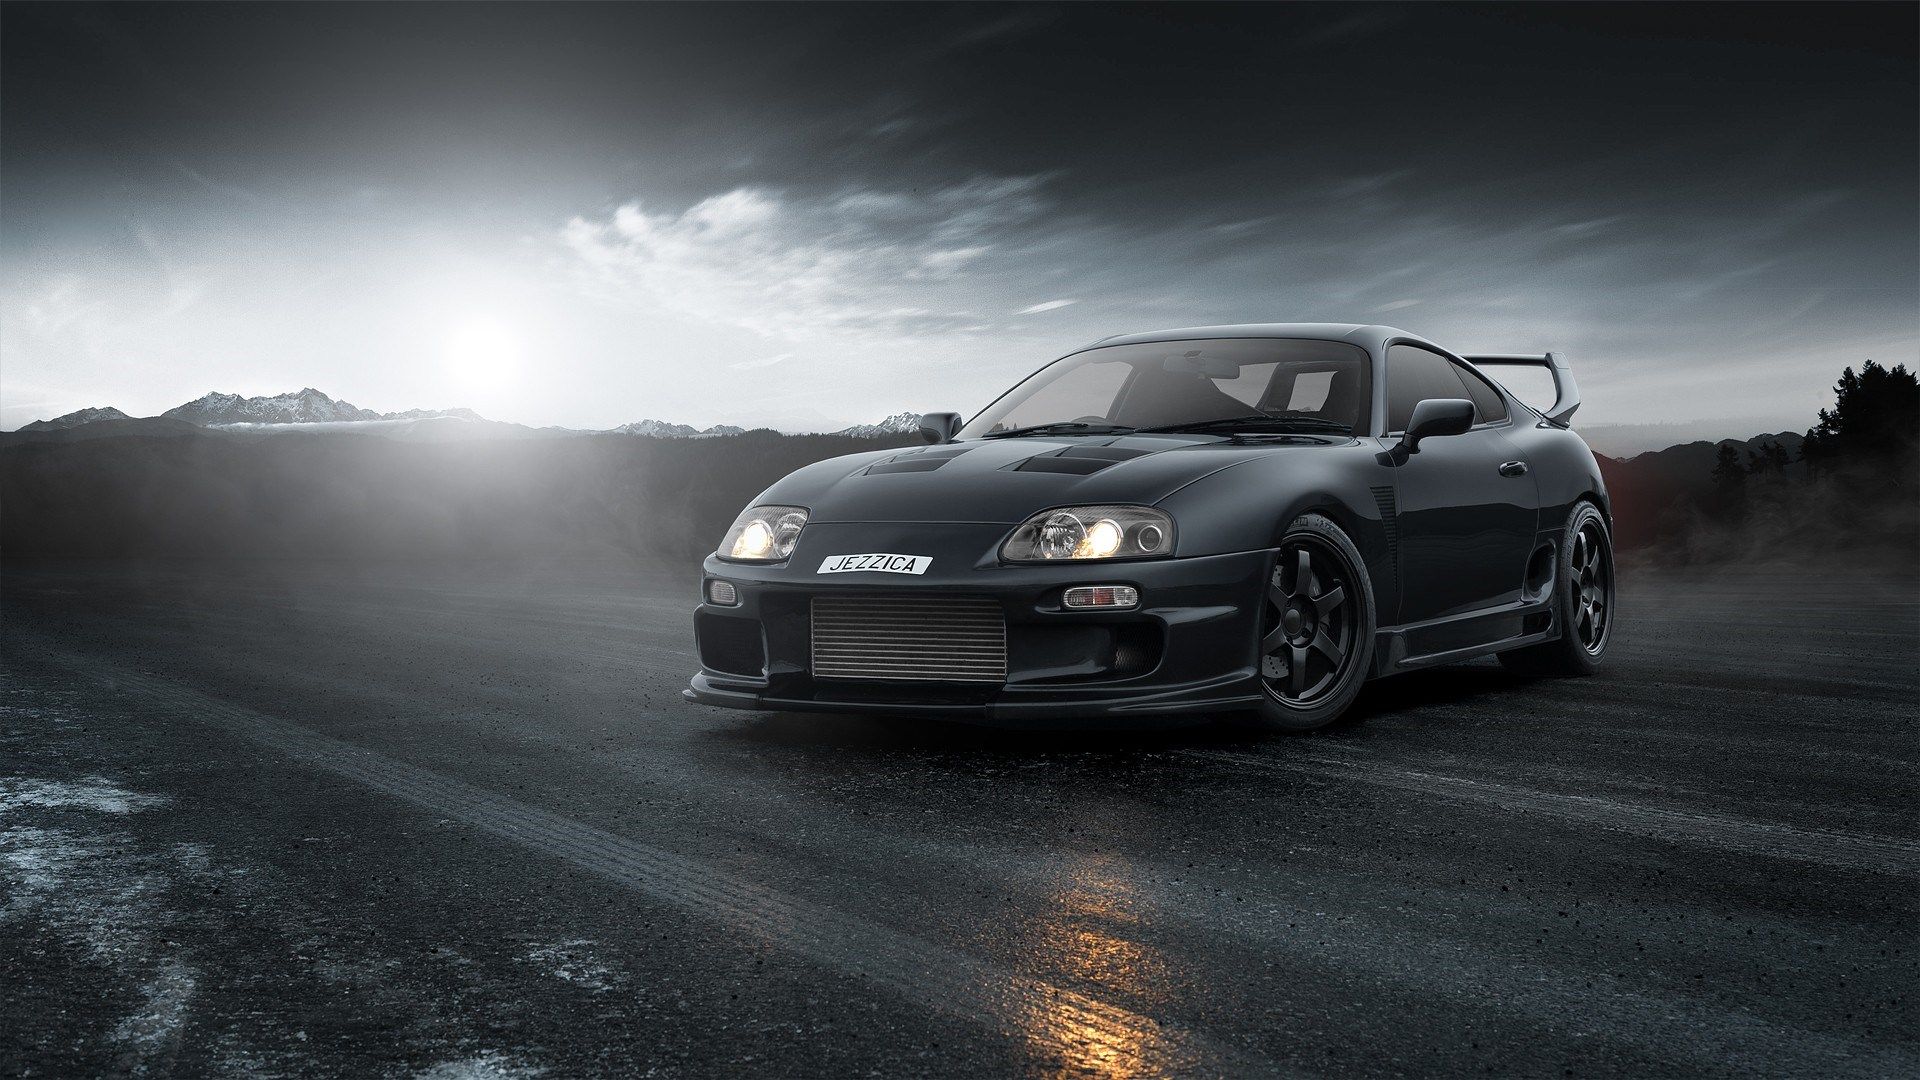 27 Toyota Supra HD Wallpapers Backgrounds - Wallpaper Abyss